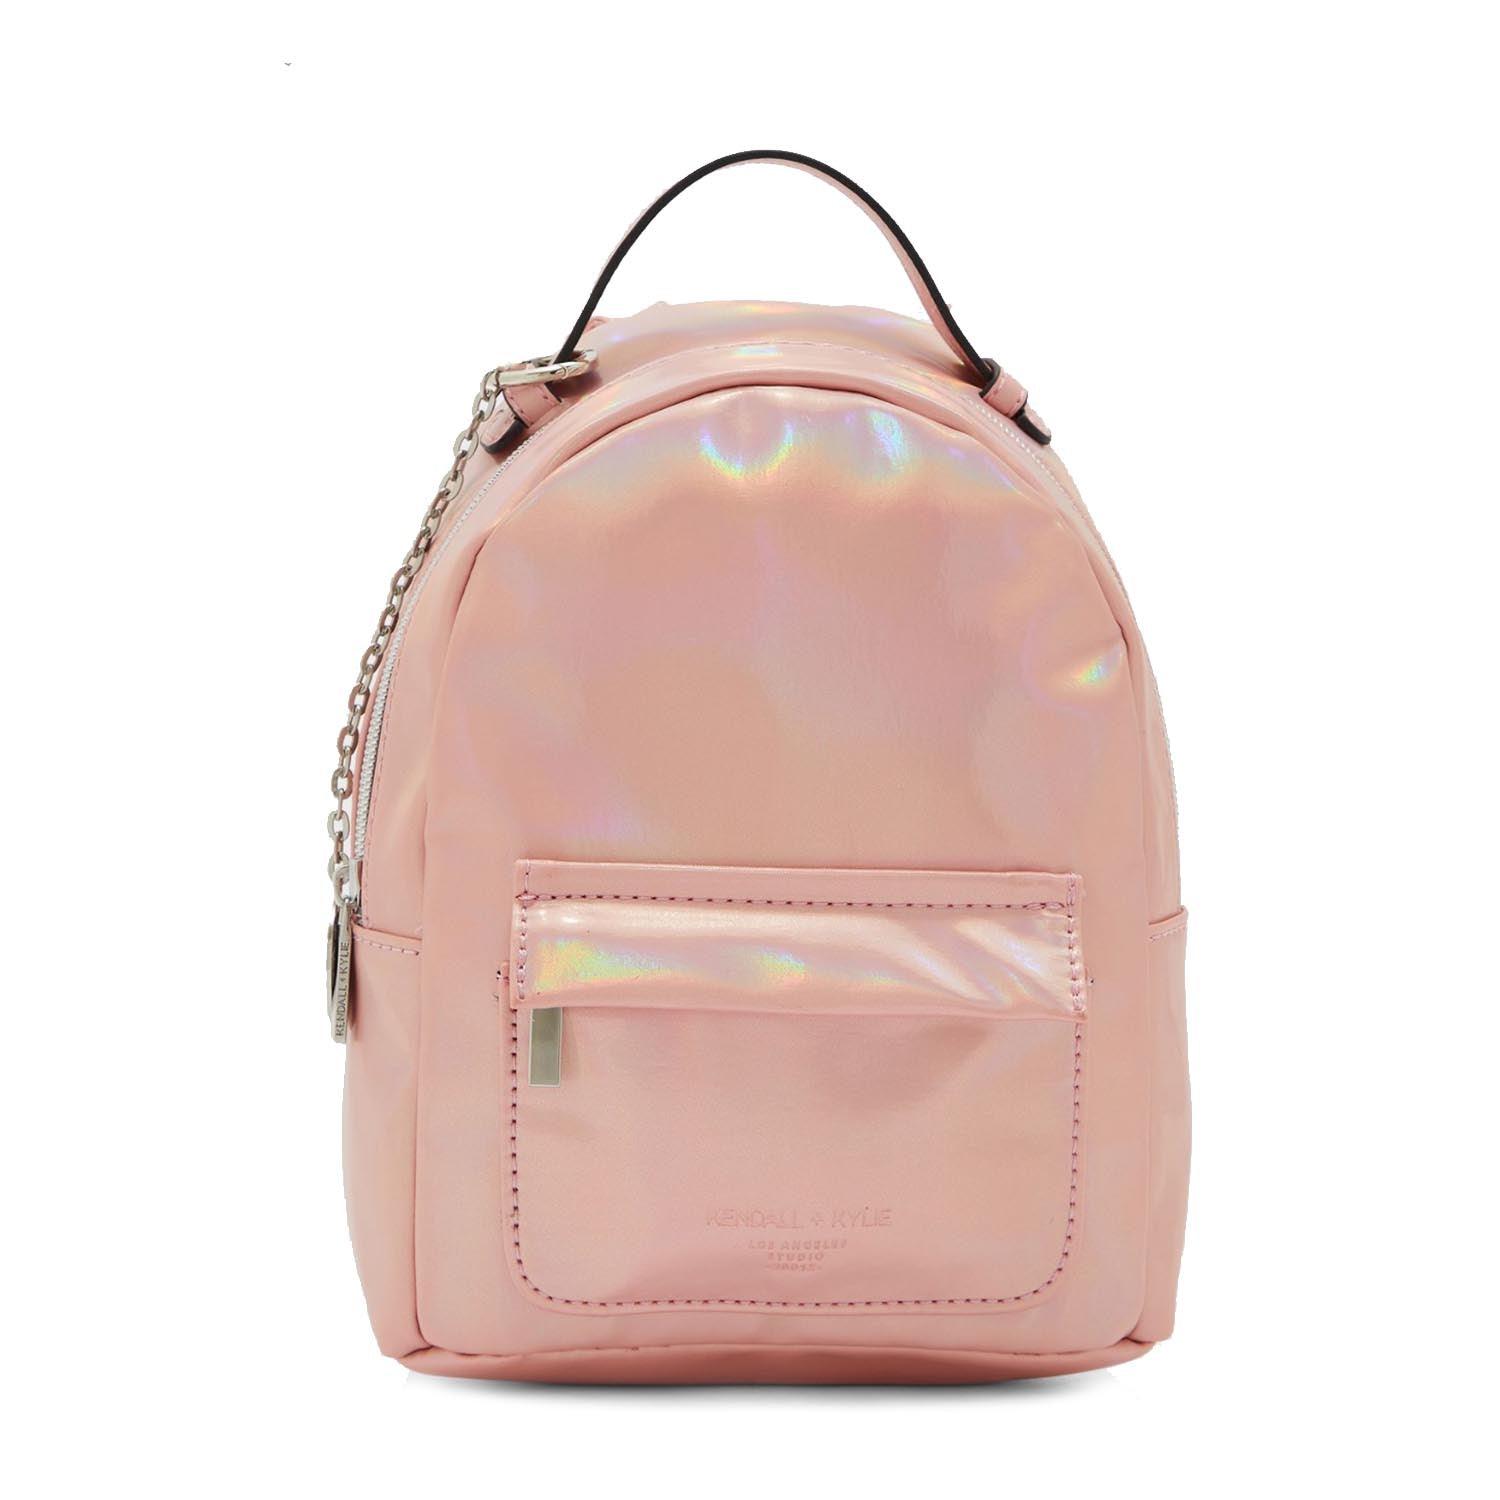 Kendall + Kylie Mini Backpack-Black NEW WITH TAGS | eBay